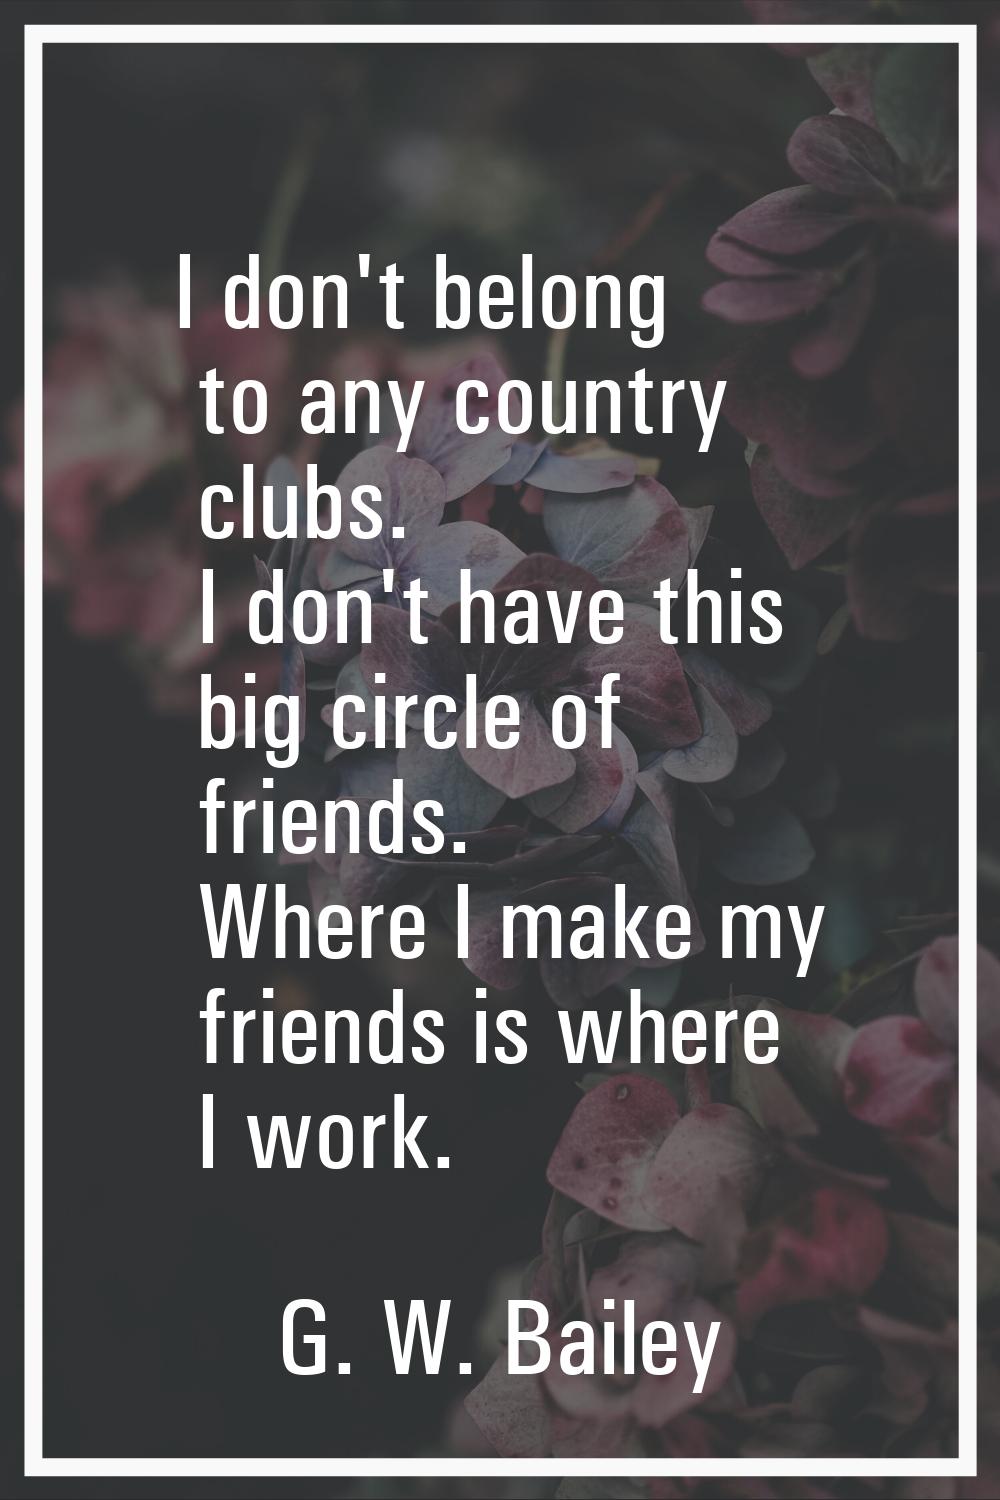 I don't belong to any country clubs. I don't have this big circle of friends. Where I make my frien